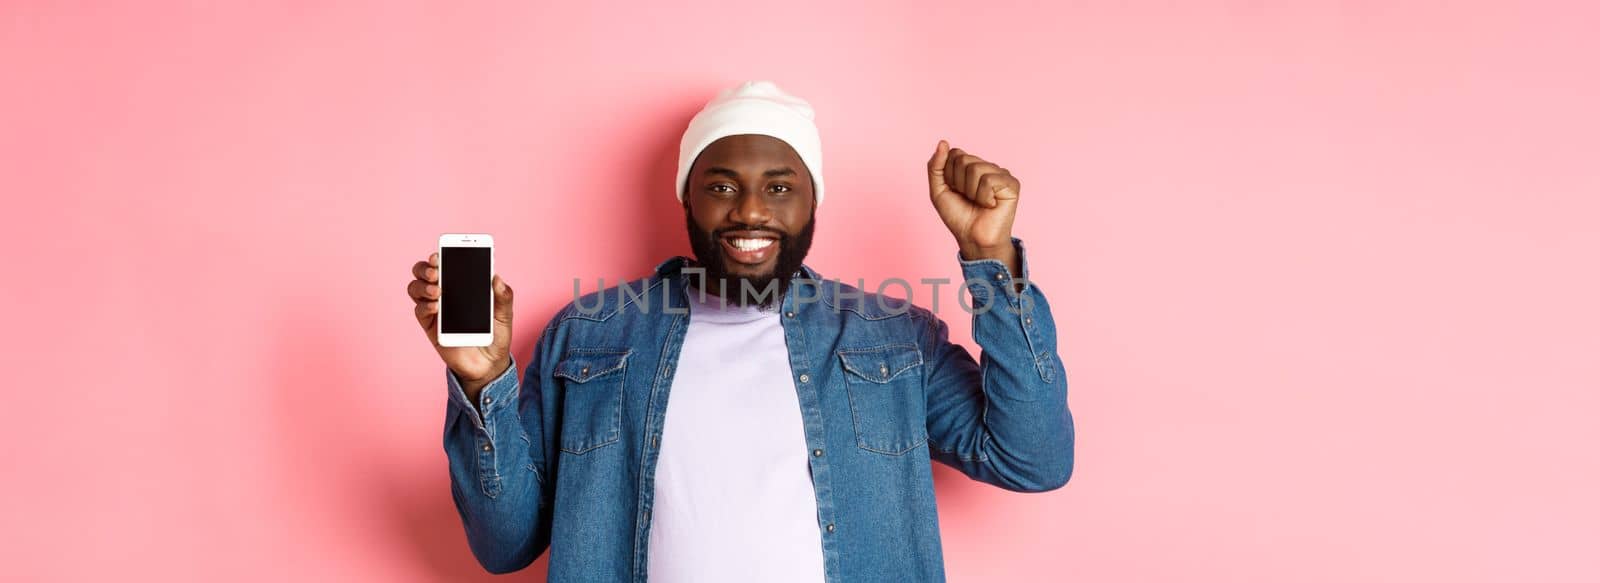 Online shopping and technology concept. Cheerful Black man rejoicing and showing mobile screen, raising hand up satisfied, triumphing while standing over pink background.